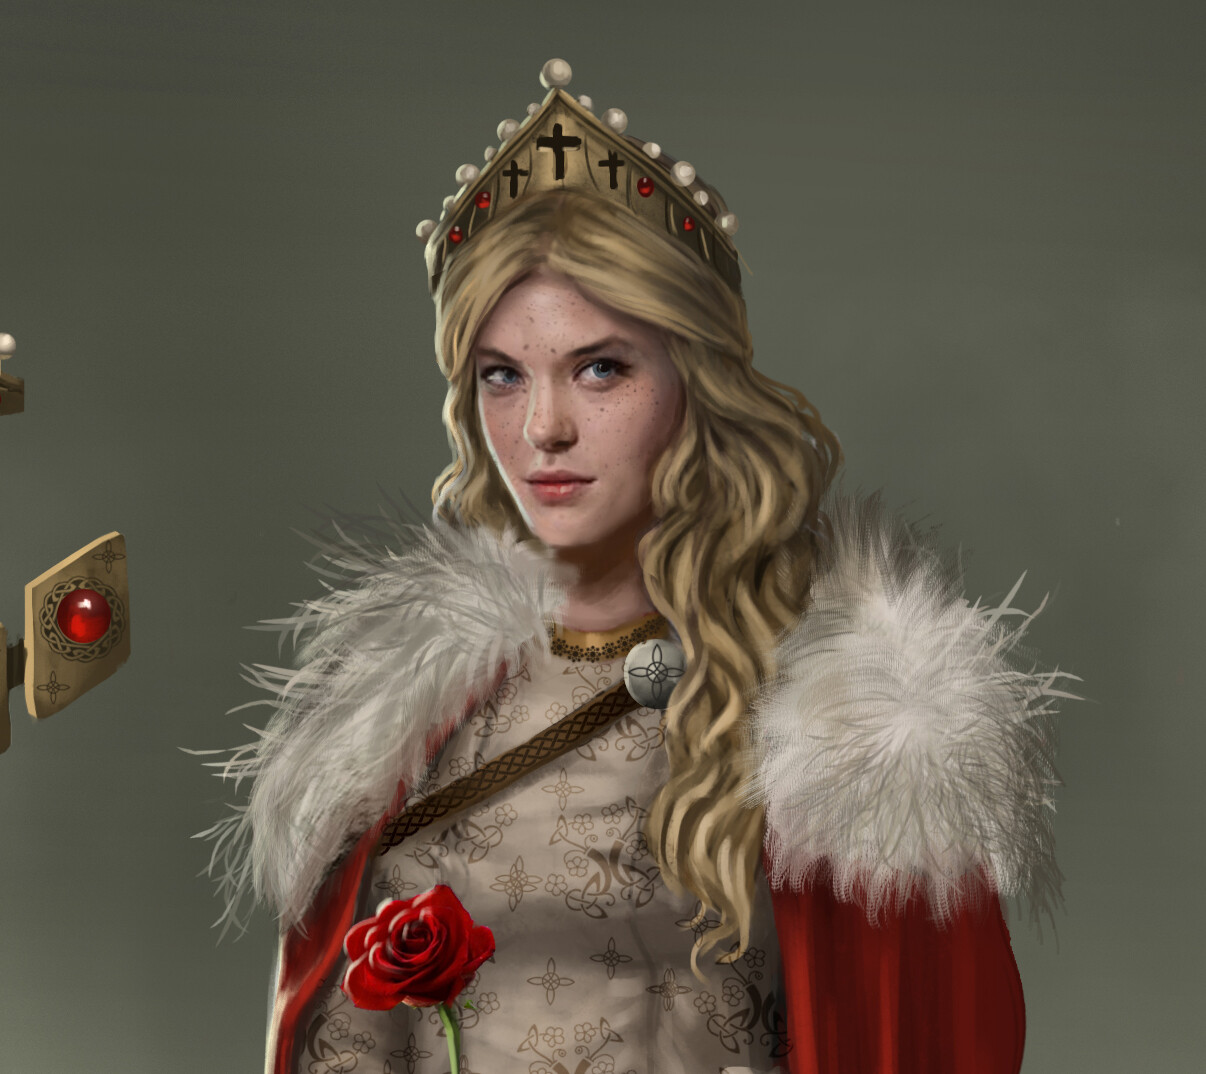 Could be fun if they added King Arthur as a commander. Art by Gislaine  Avila : r/RiseofKingdoms